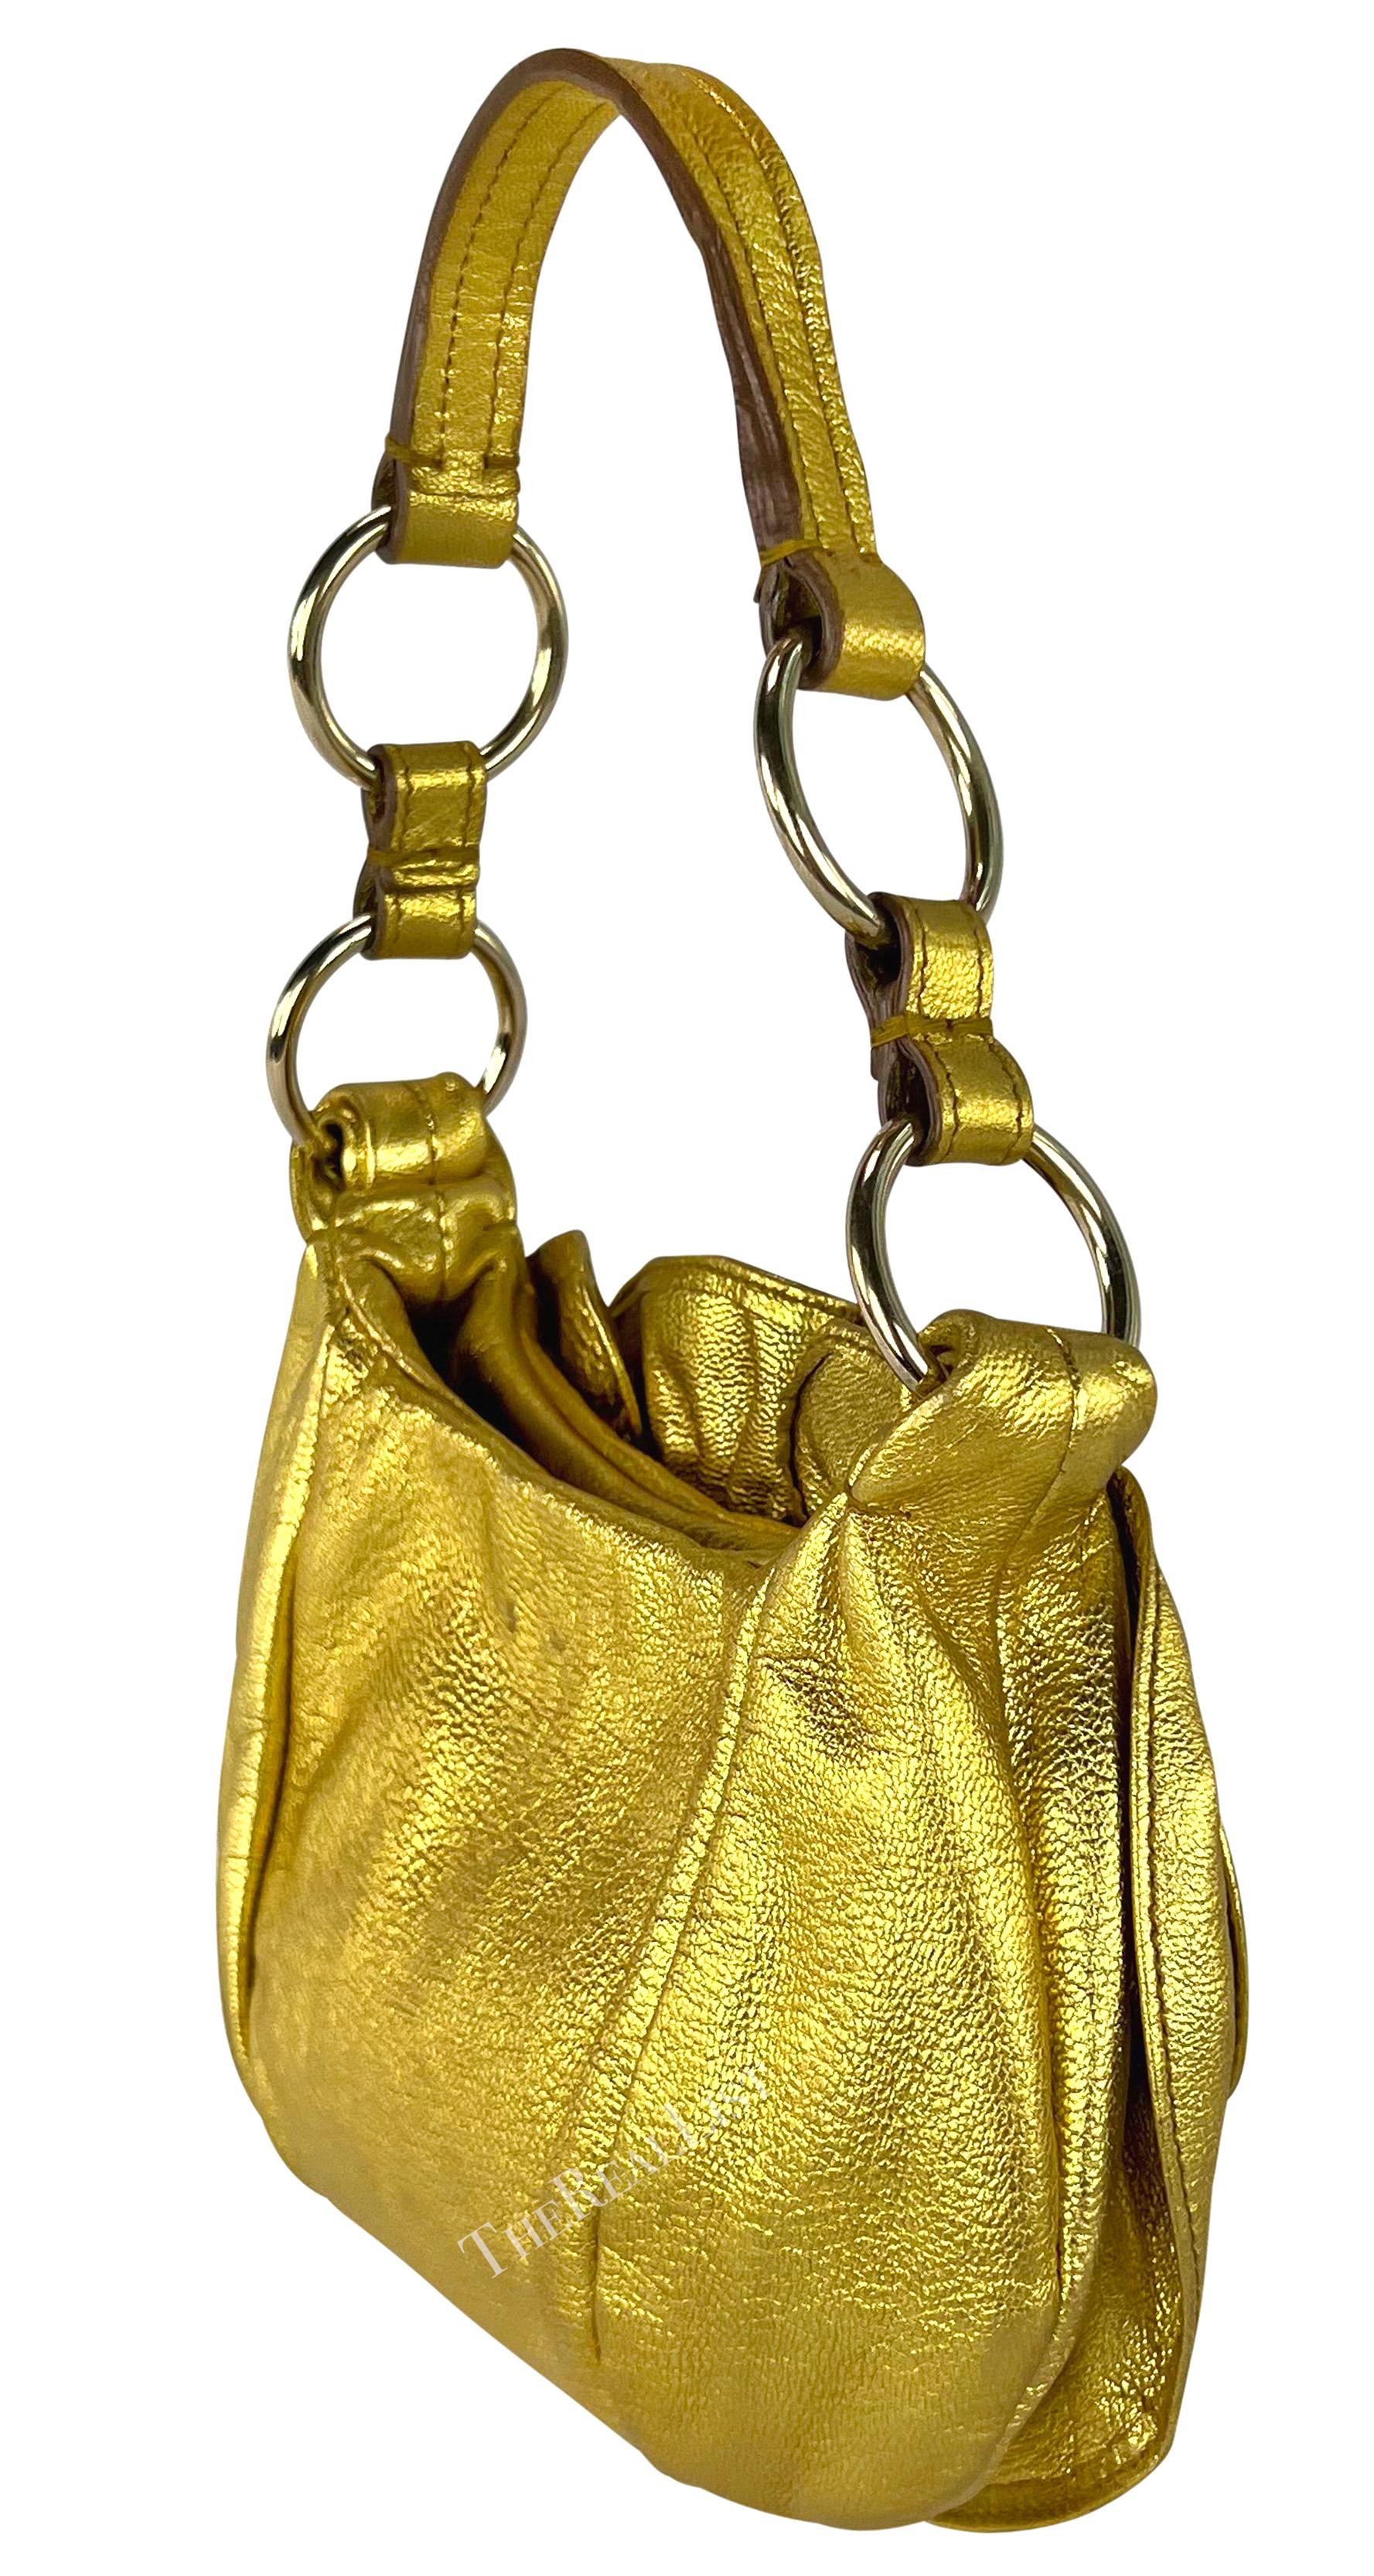 2000s Yves Saint Laurent by Tom Ford Gold Metallic Leather Floral Mini Bag For Sale 3